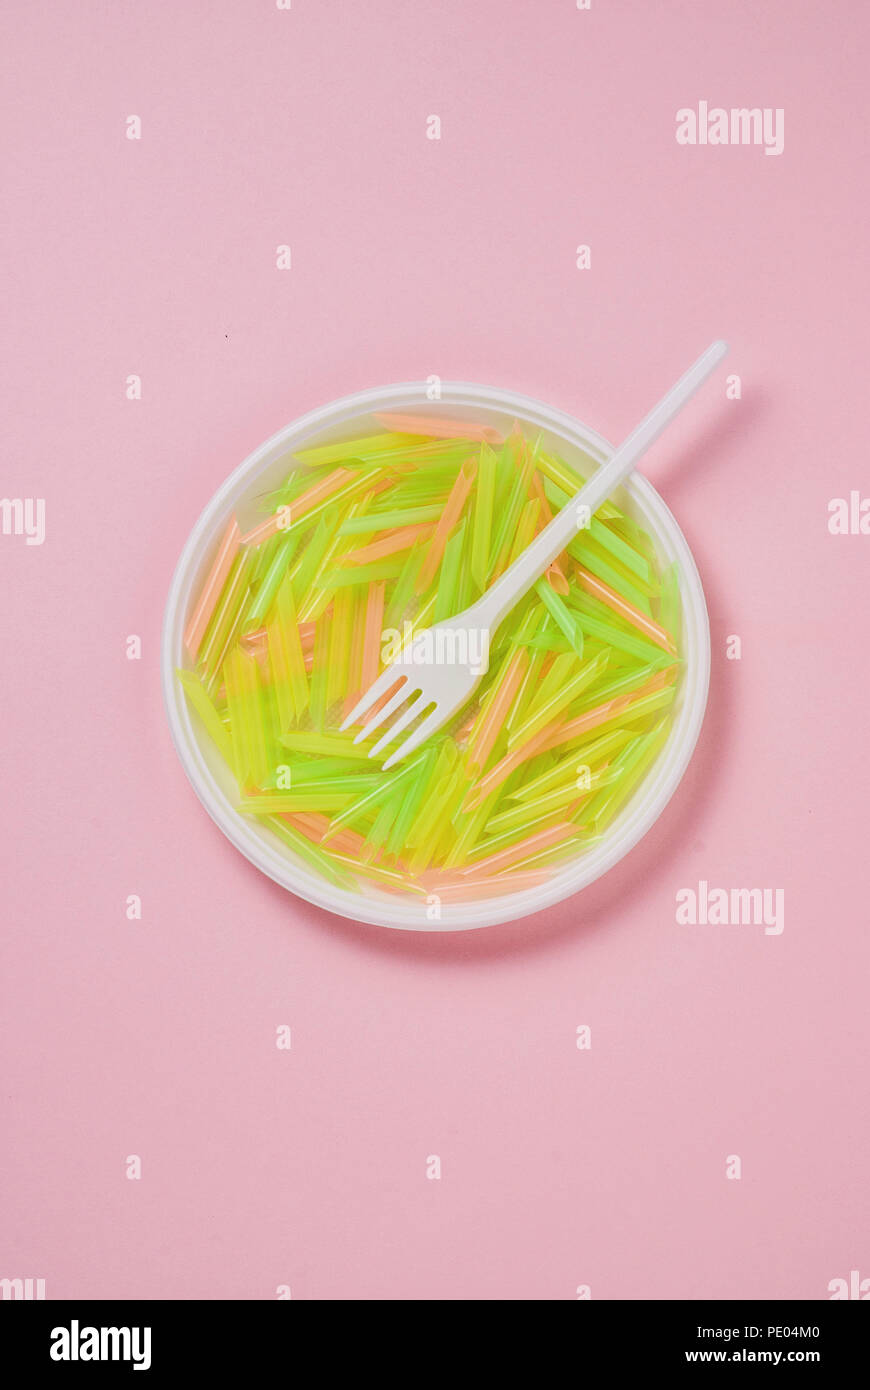 Plate and fork of plastic on a pink background Stock Photo